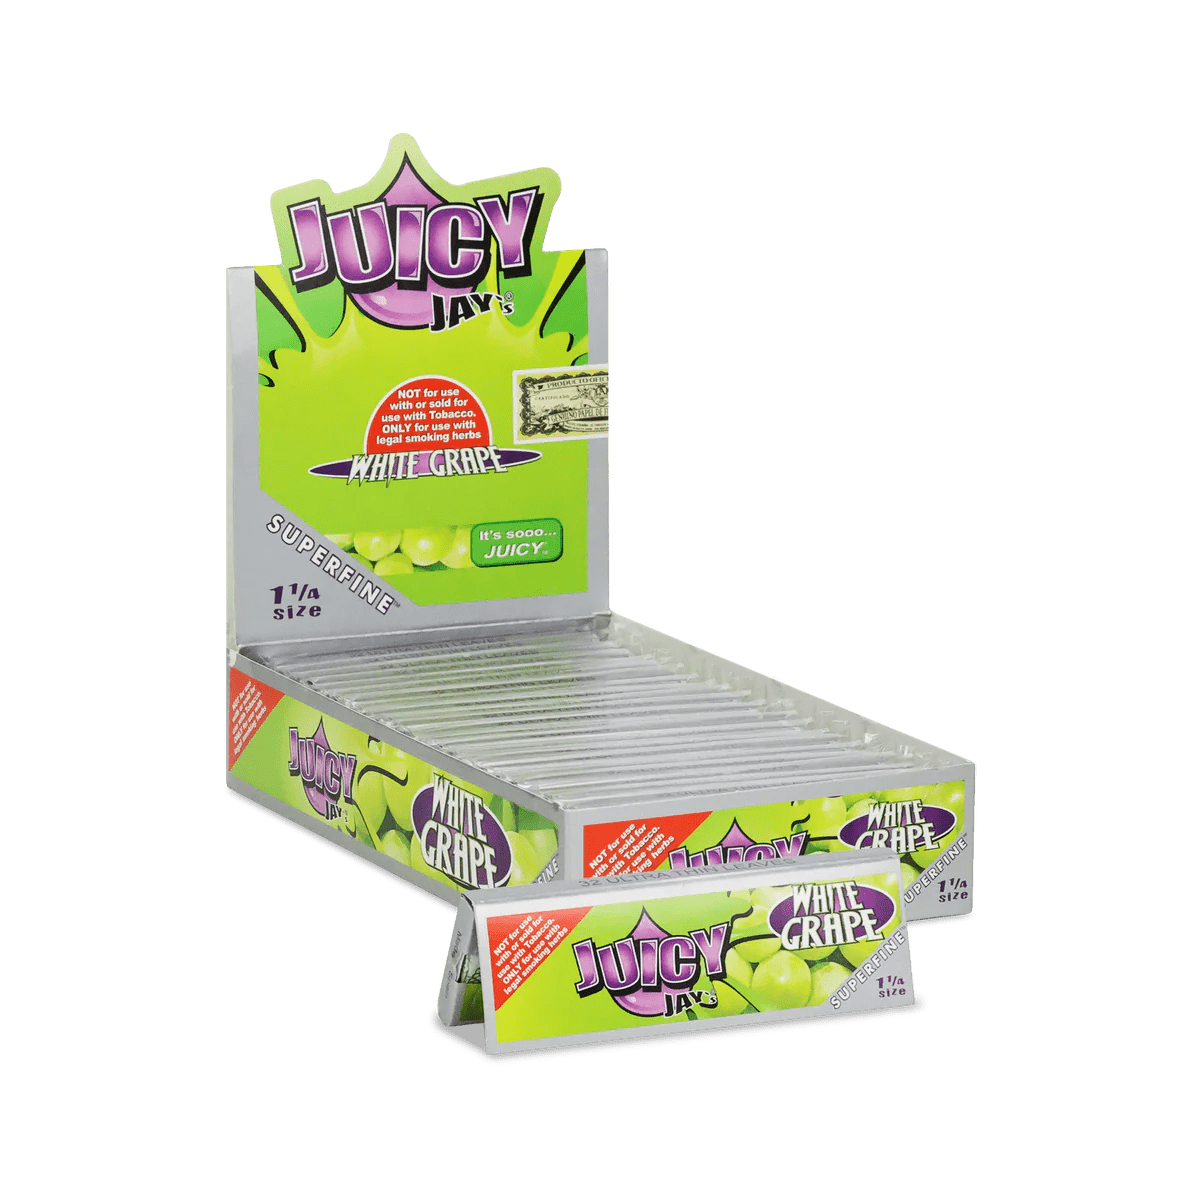 Juicy Jay Rolling Paper White Grape / Box of 24 Super Fine Rolling Papers